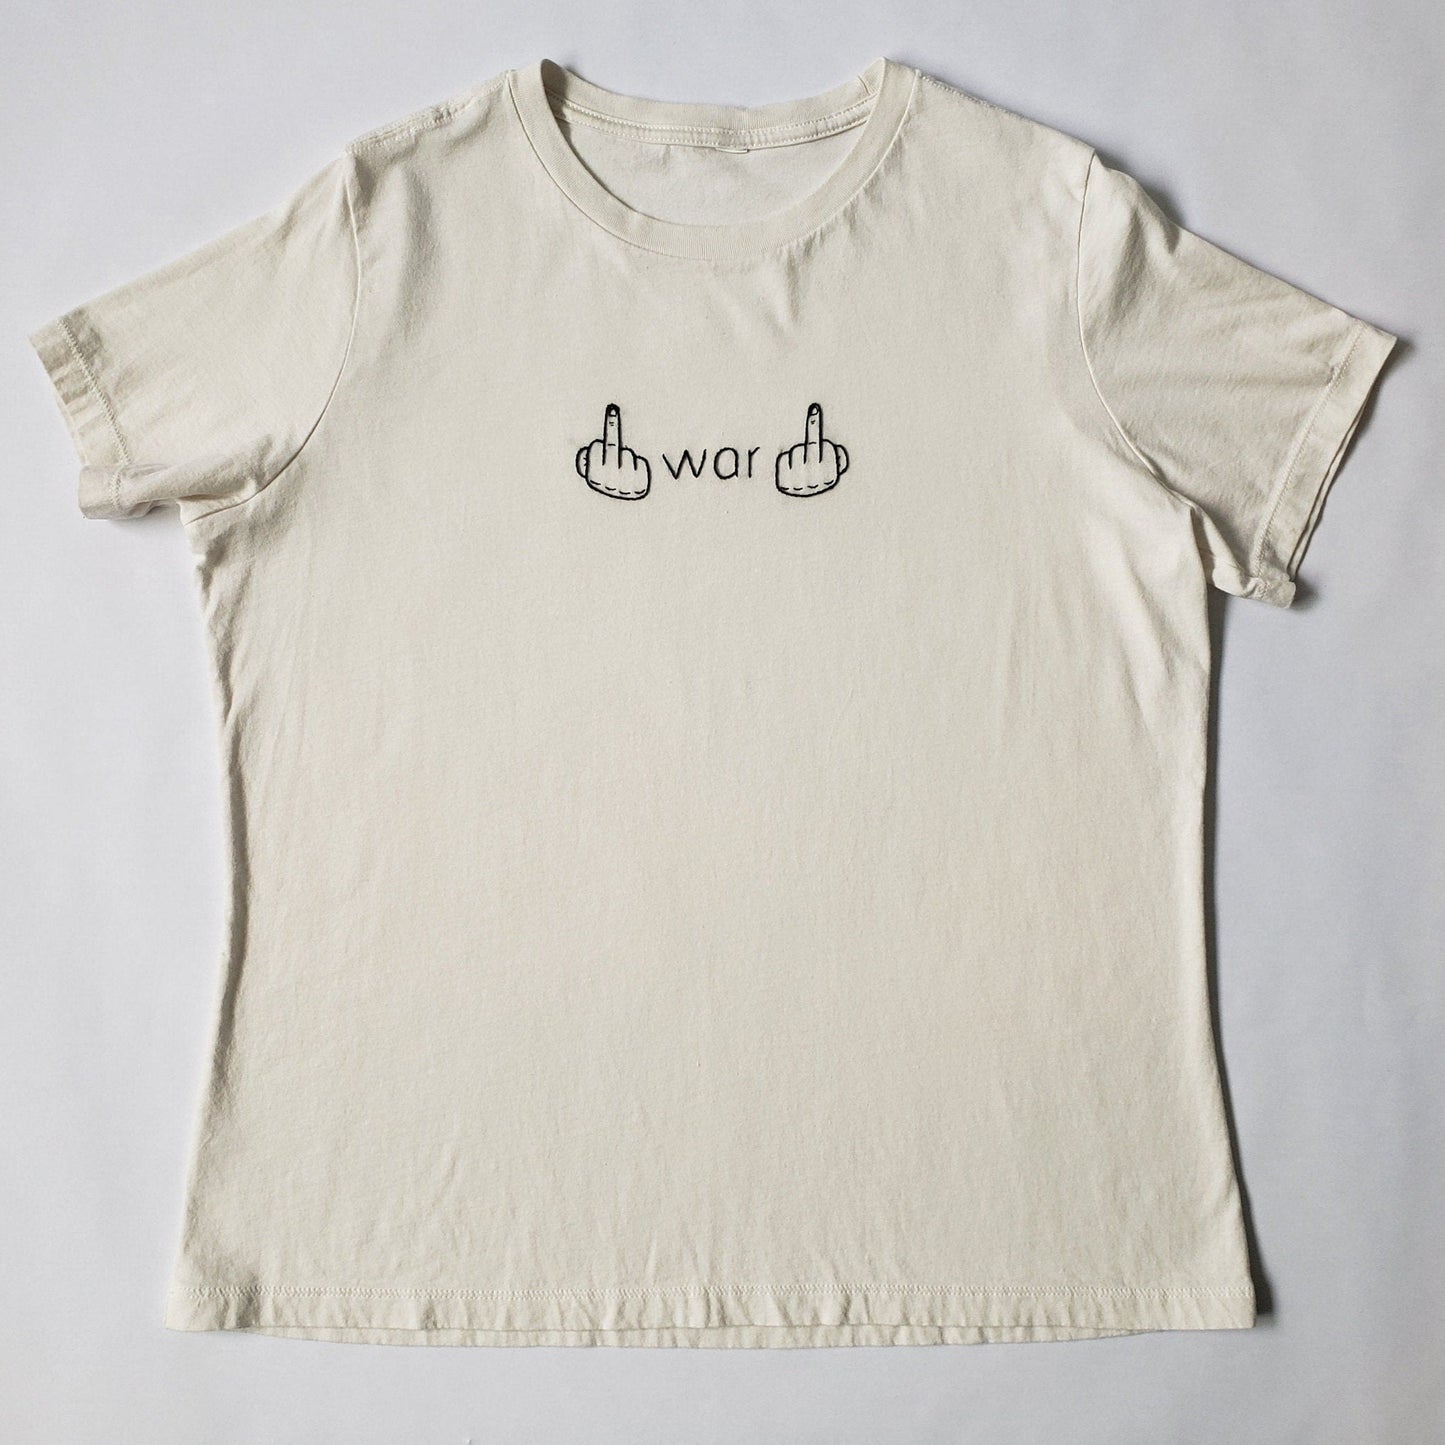 An off white crew neck t shirt lays flat on a white background. War and two hands giving the finger are hand embroidered in the middle of the chest. The text is in a font similar to Helvetica and the hands are slightly brutalist in style